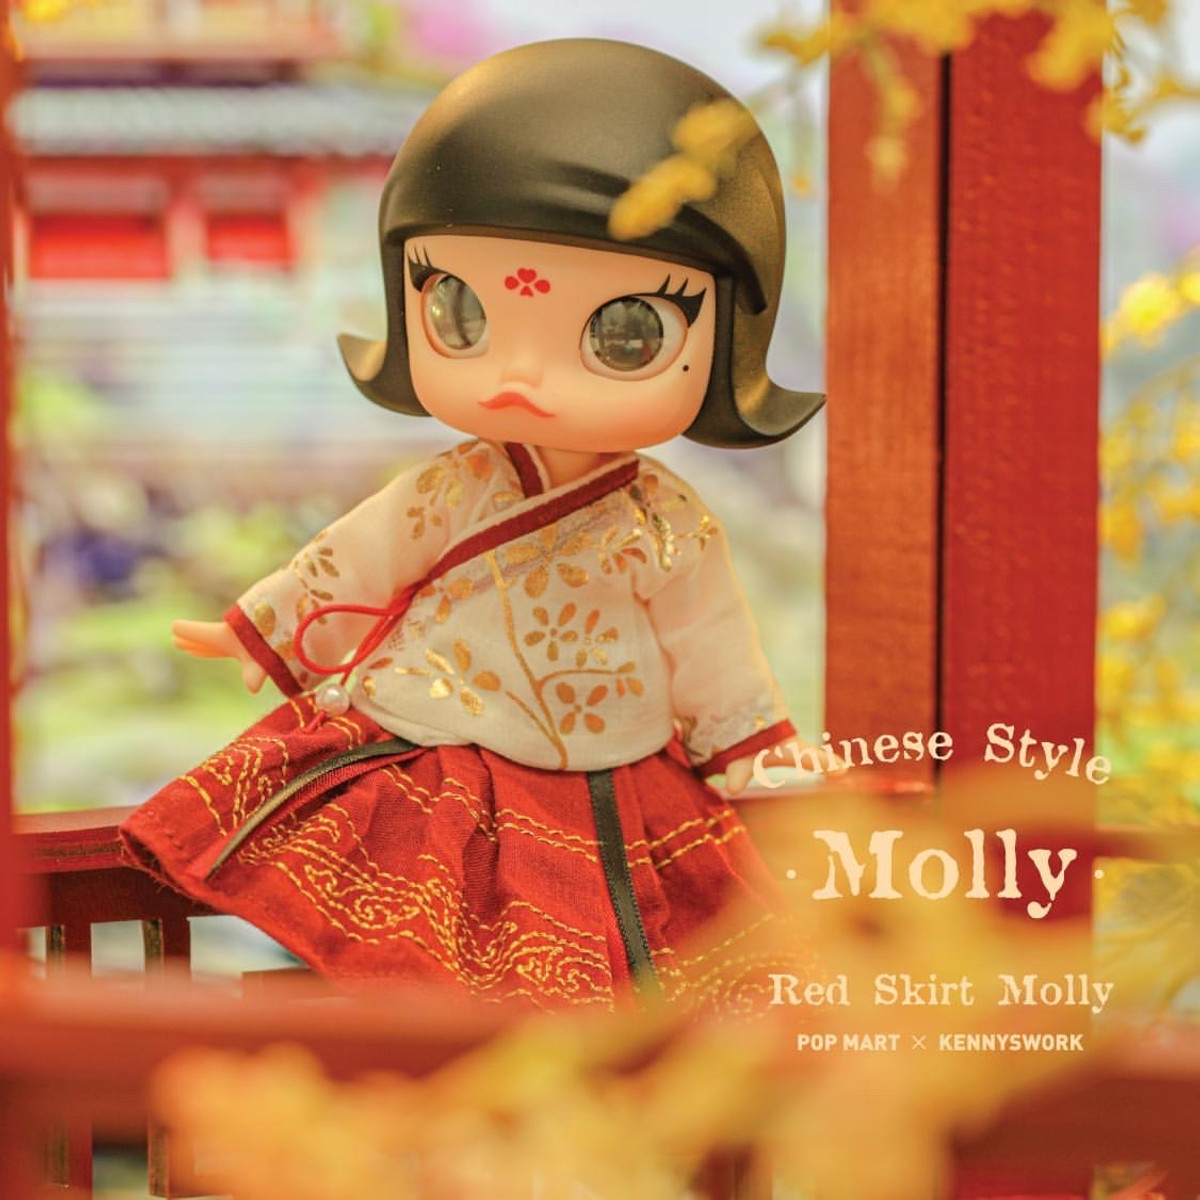 Molly BJD Chinese Style Red Skirt by Kenny Wong